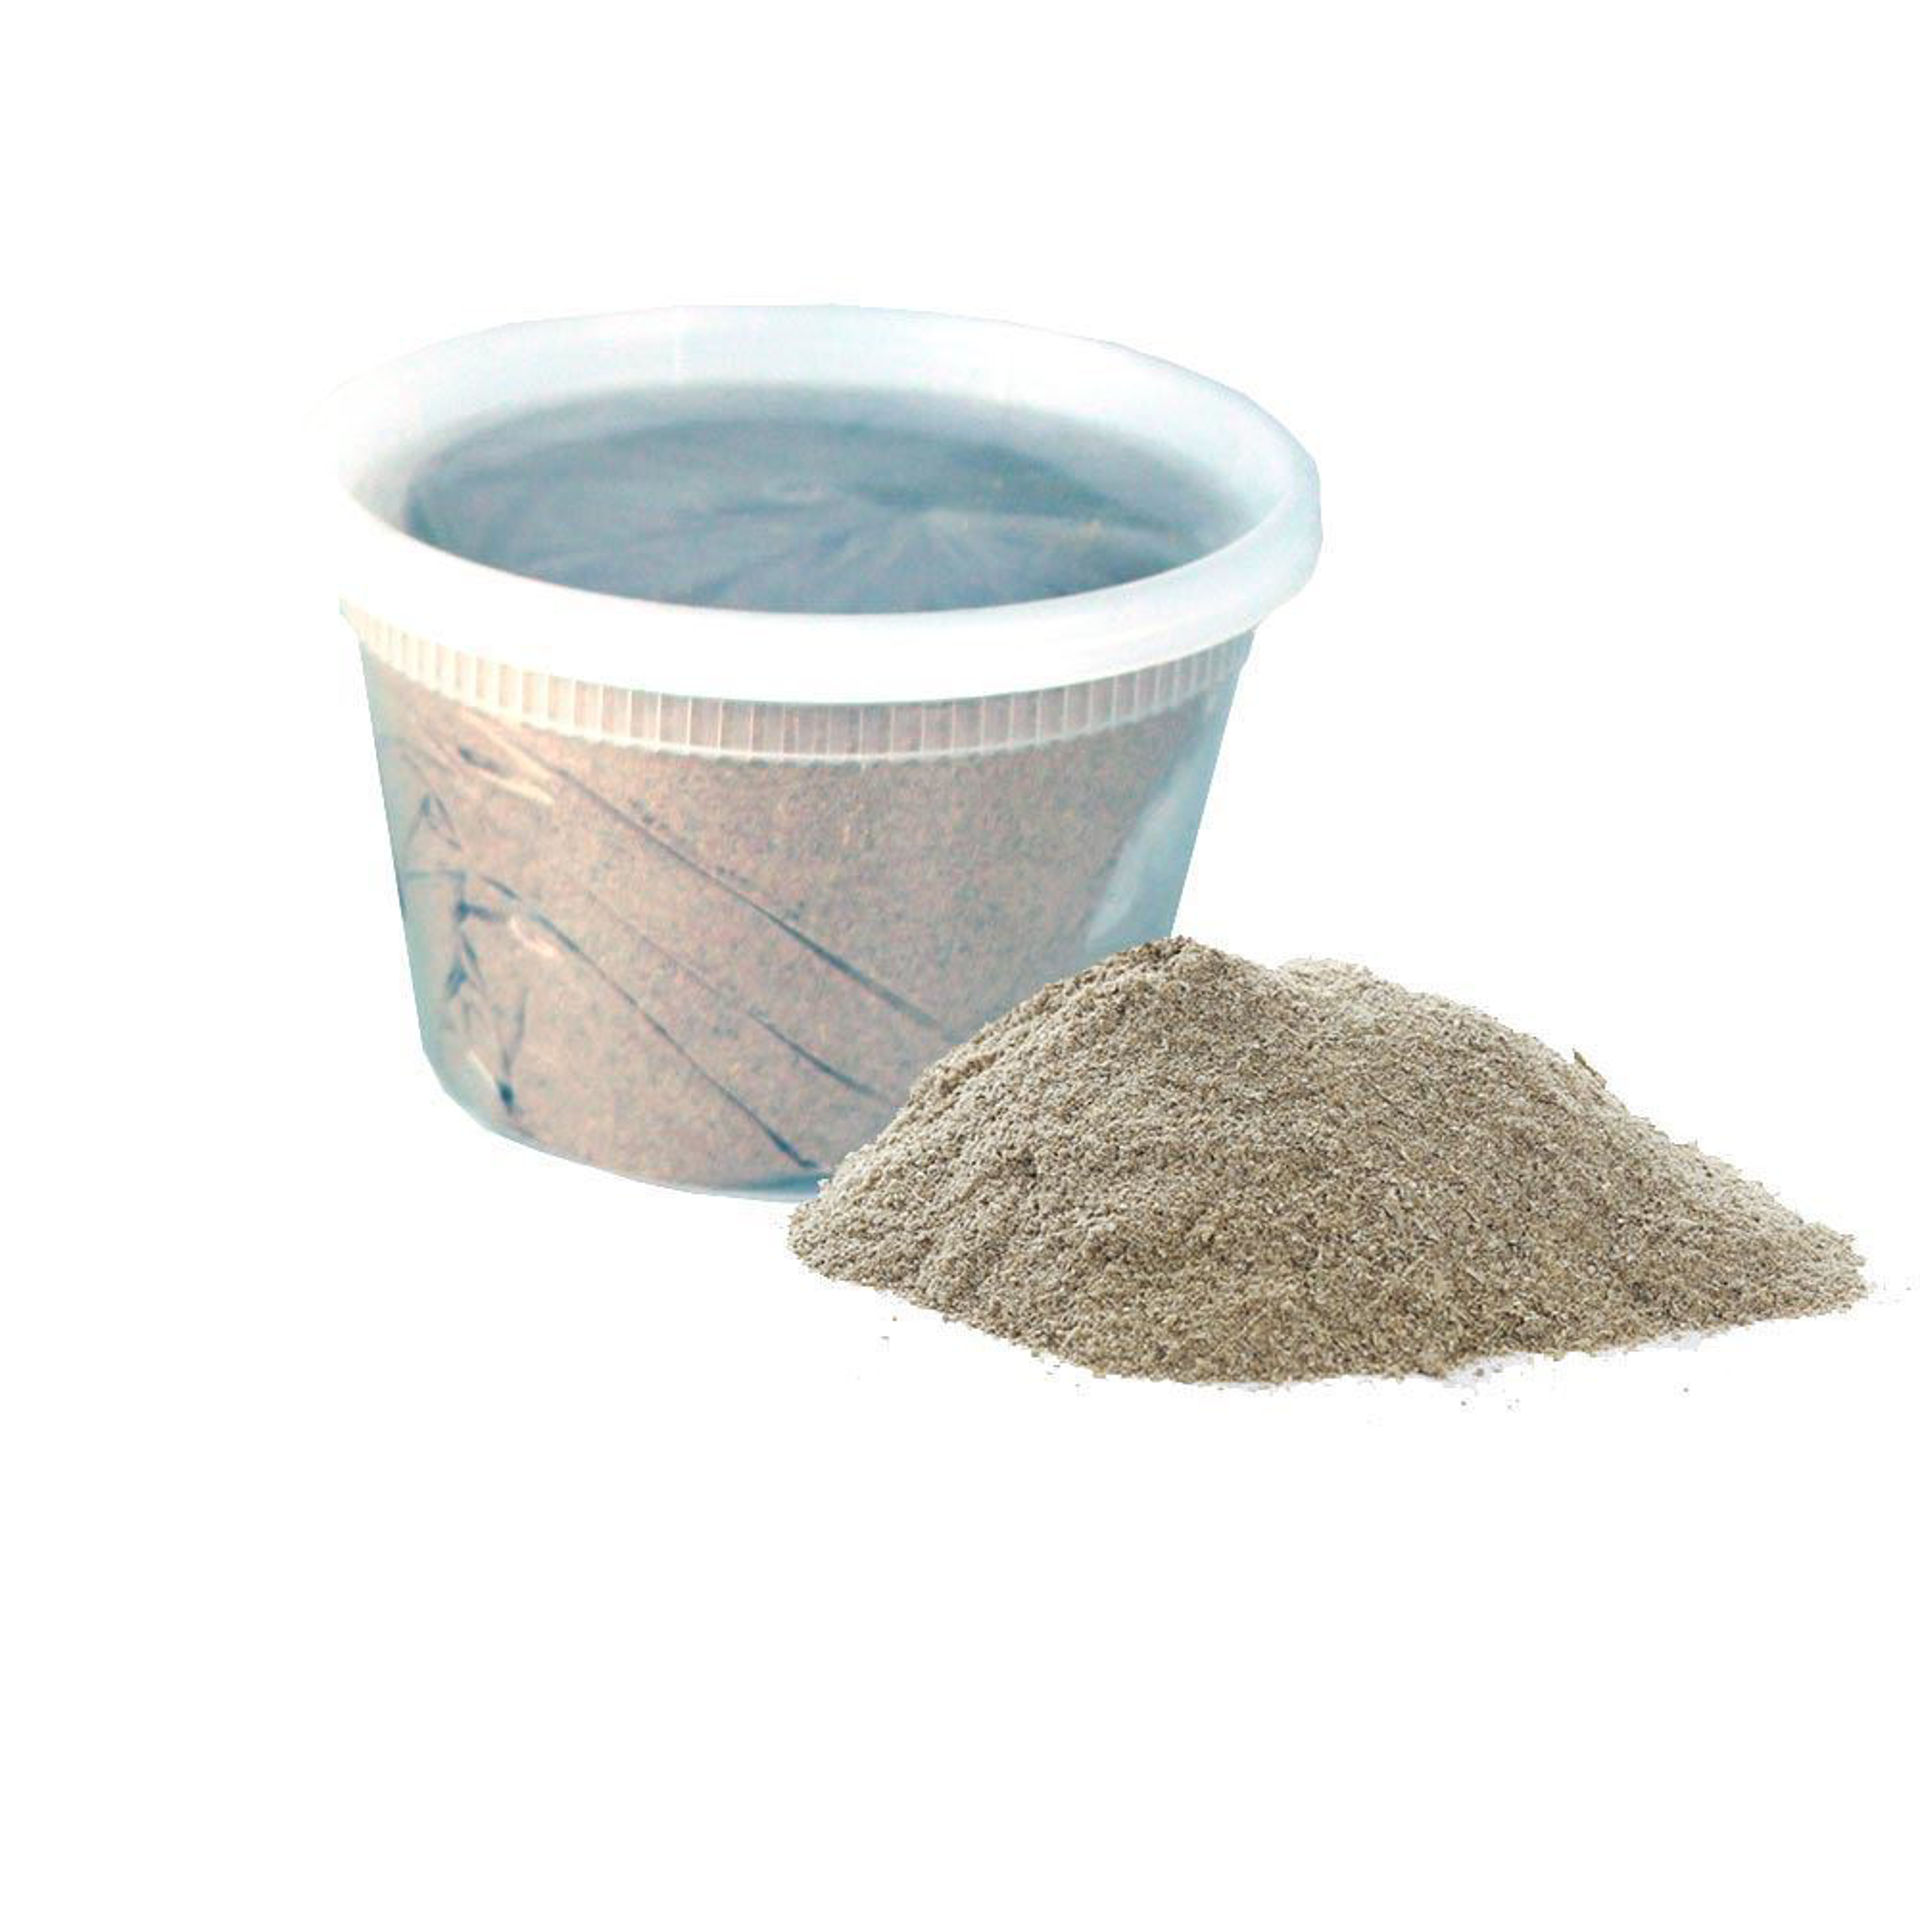 Chebe Powder Buy pure and authentic chebe powder from Africa Imports to get long and lustrous hair. For more information, visit the website today! https://africaimports.com/african-chebe by Africa Imports